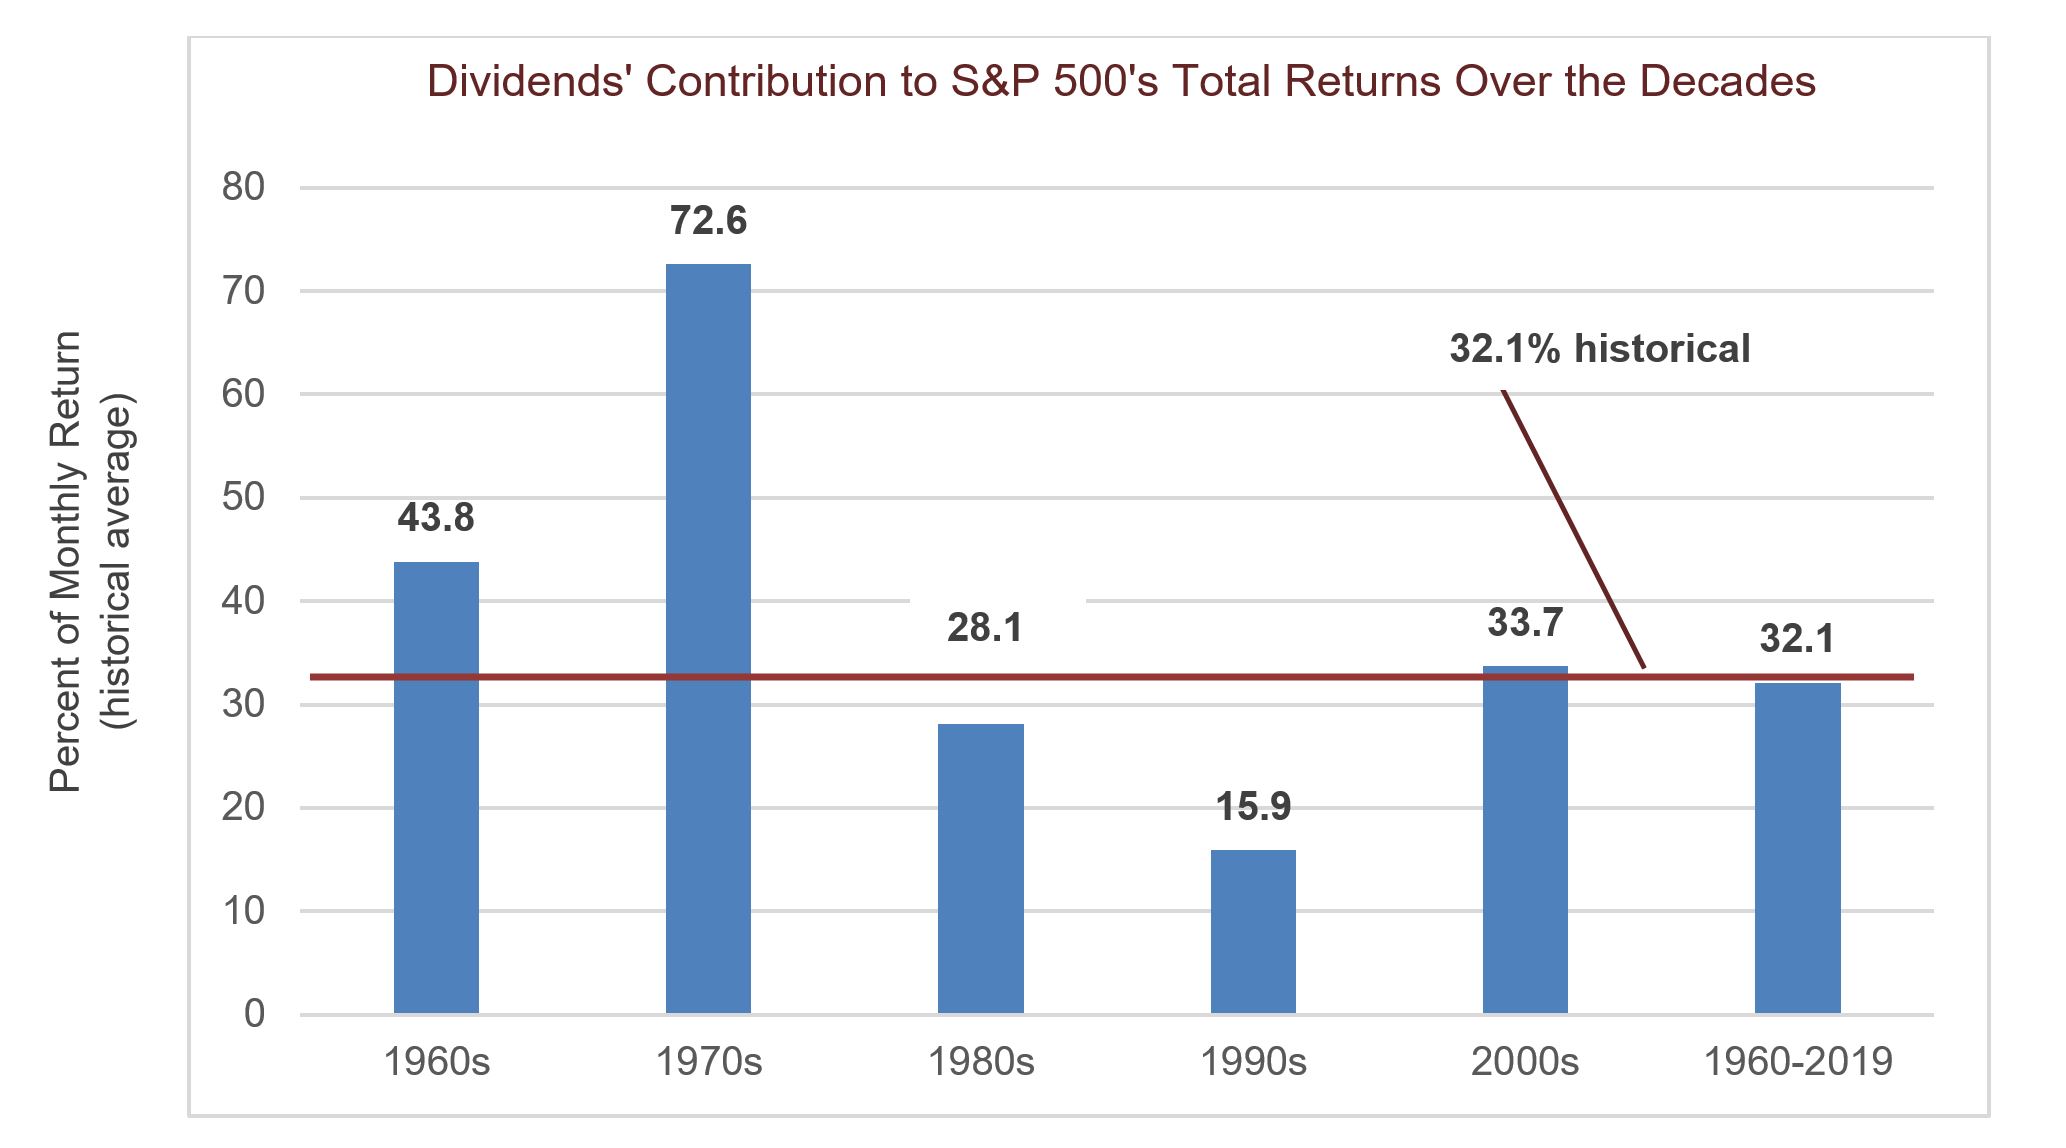 Bar chart showing the percentage contribution of dividends to total returns using historical averages.